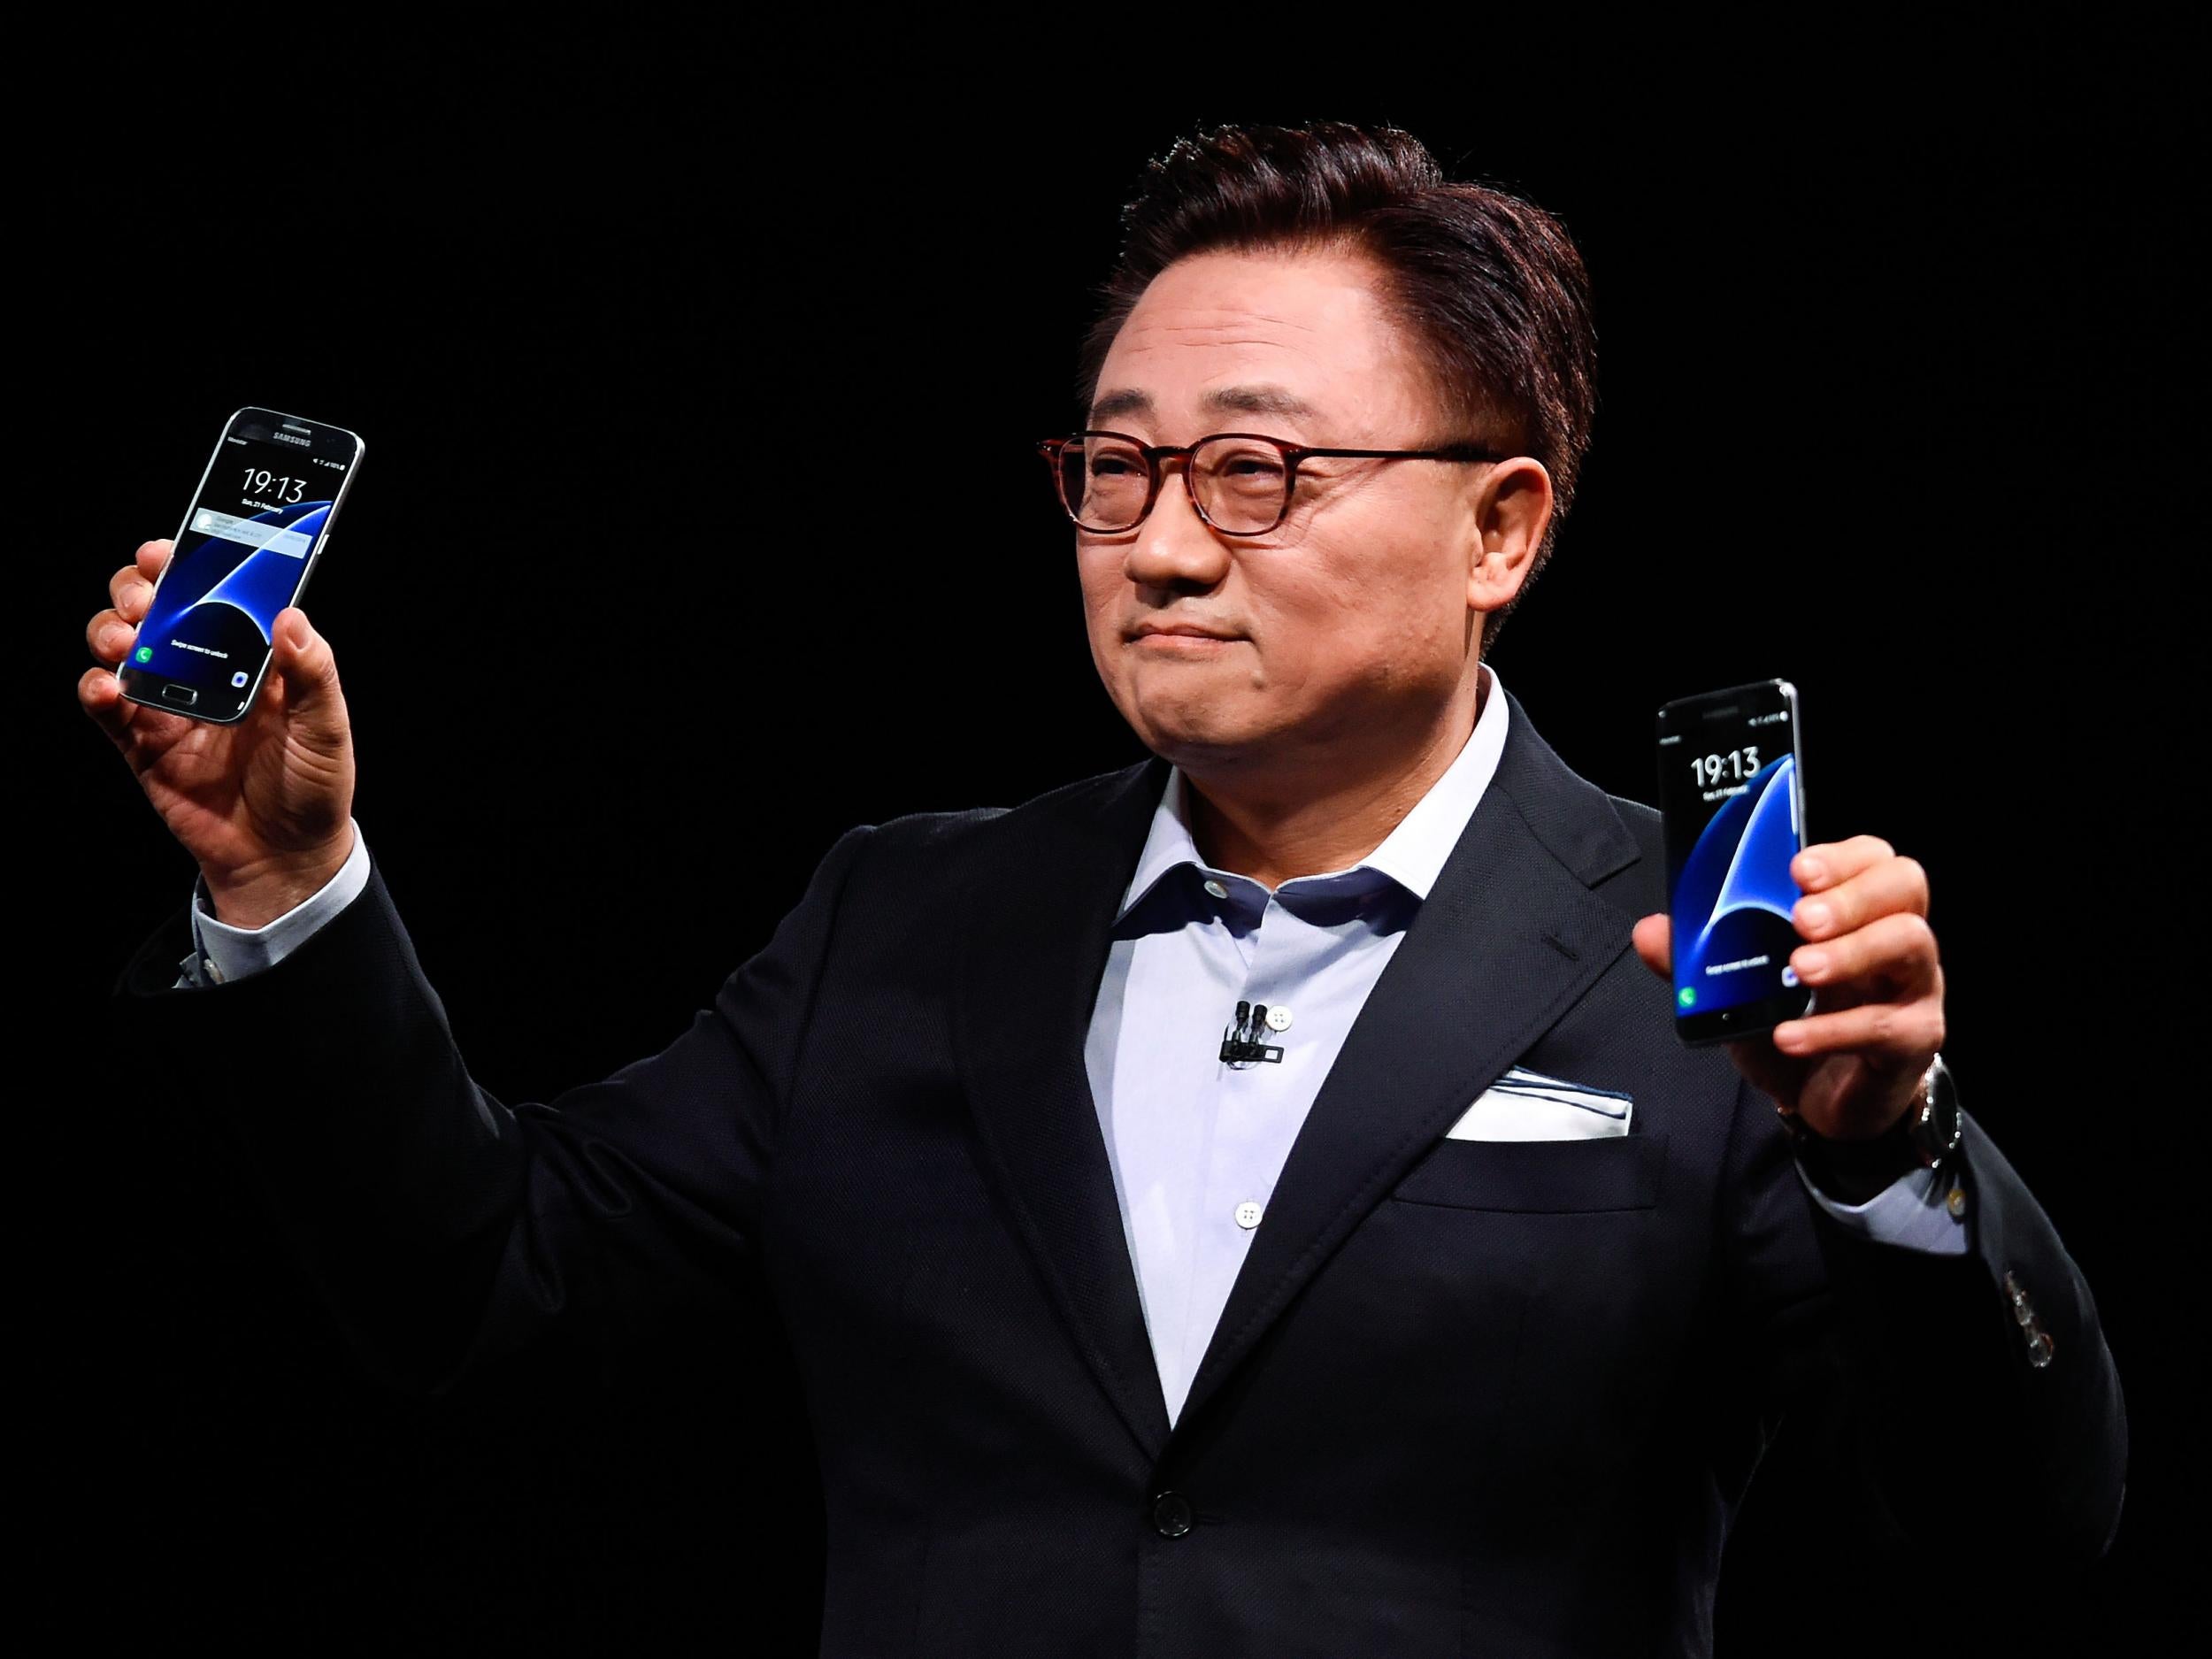 Samsung's president of mobile DJ Koh presents the Galaxy S7 and S7 Edge at Mobile World Congress